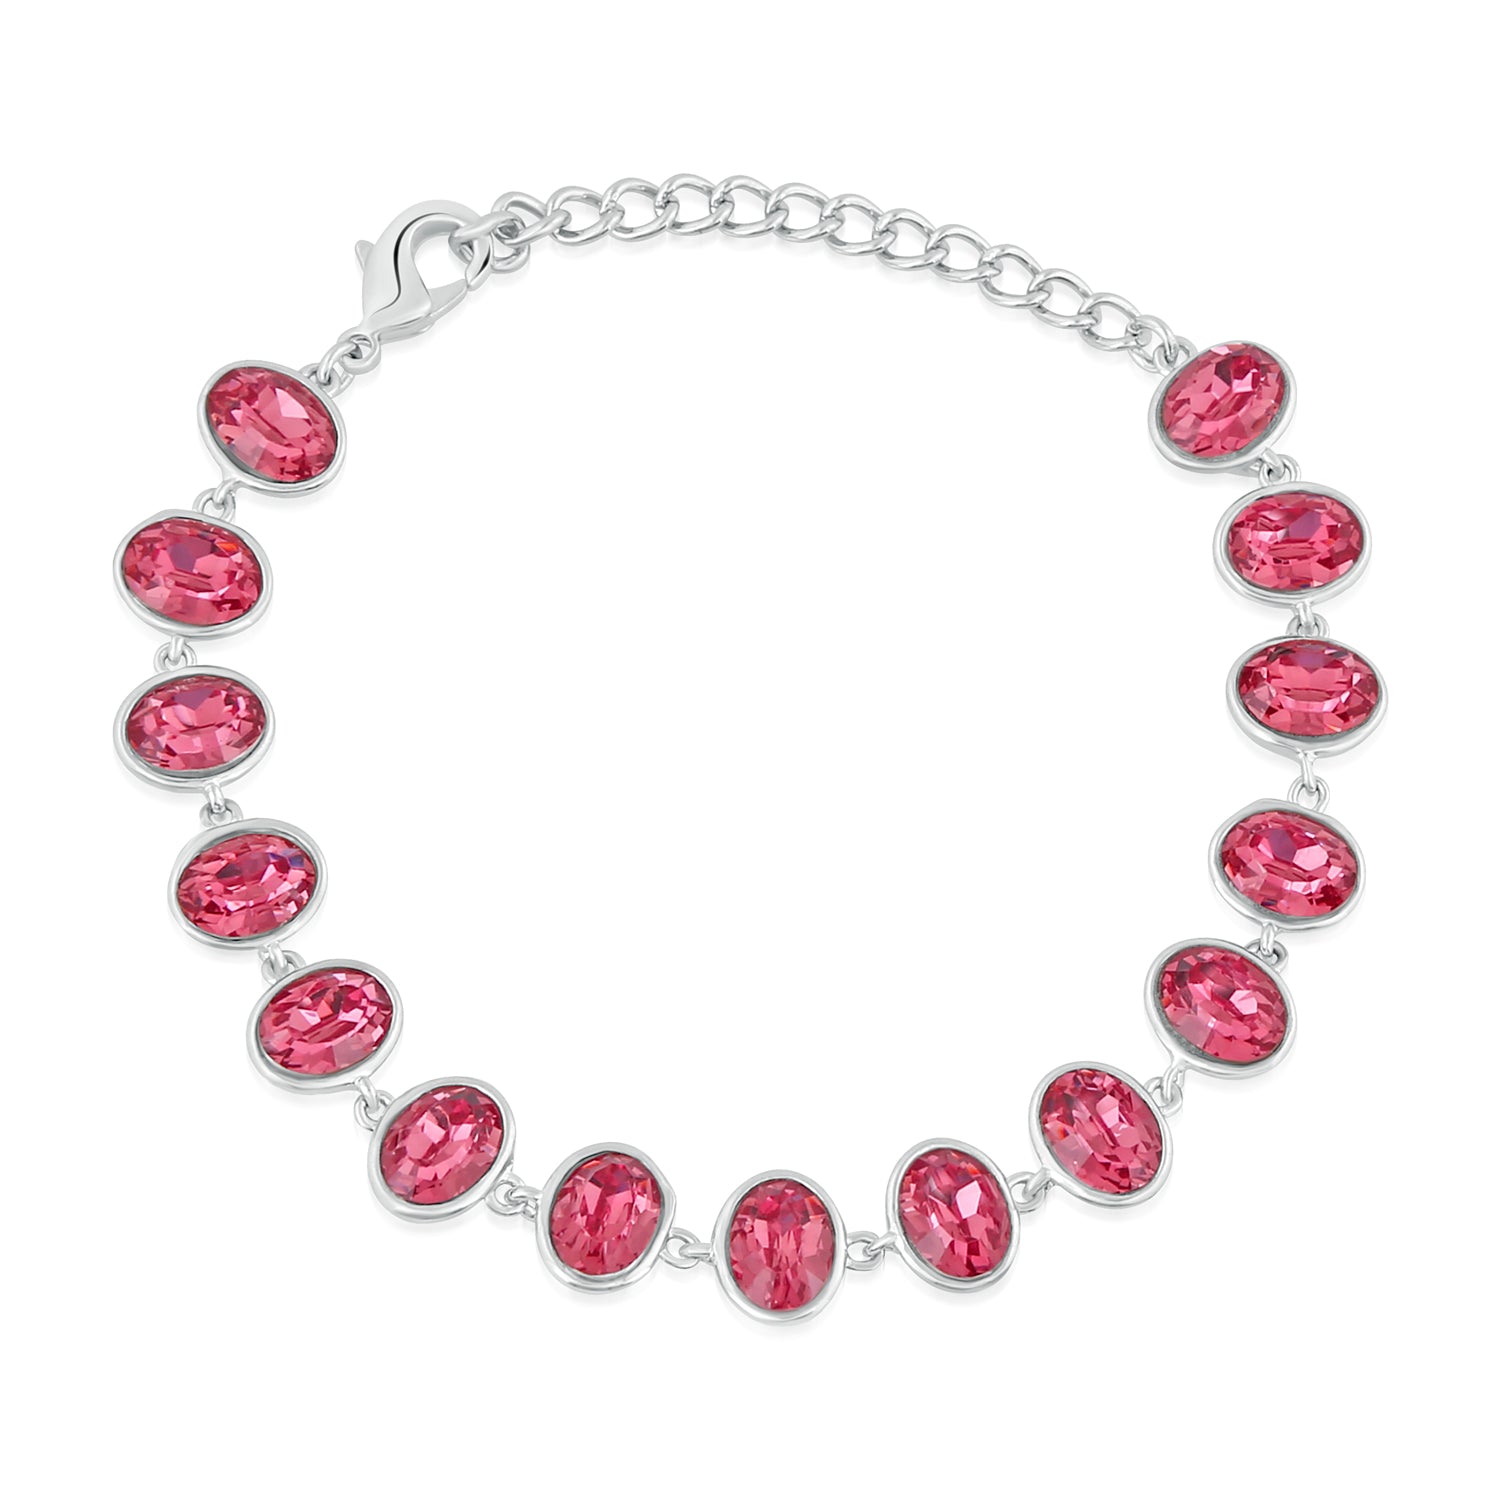 Mahi Rhodium Plated Gleaming Pink Crystals Adjustable Bracelet for girls and women